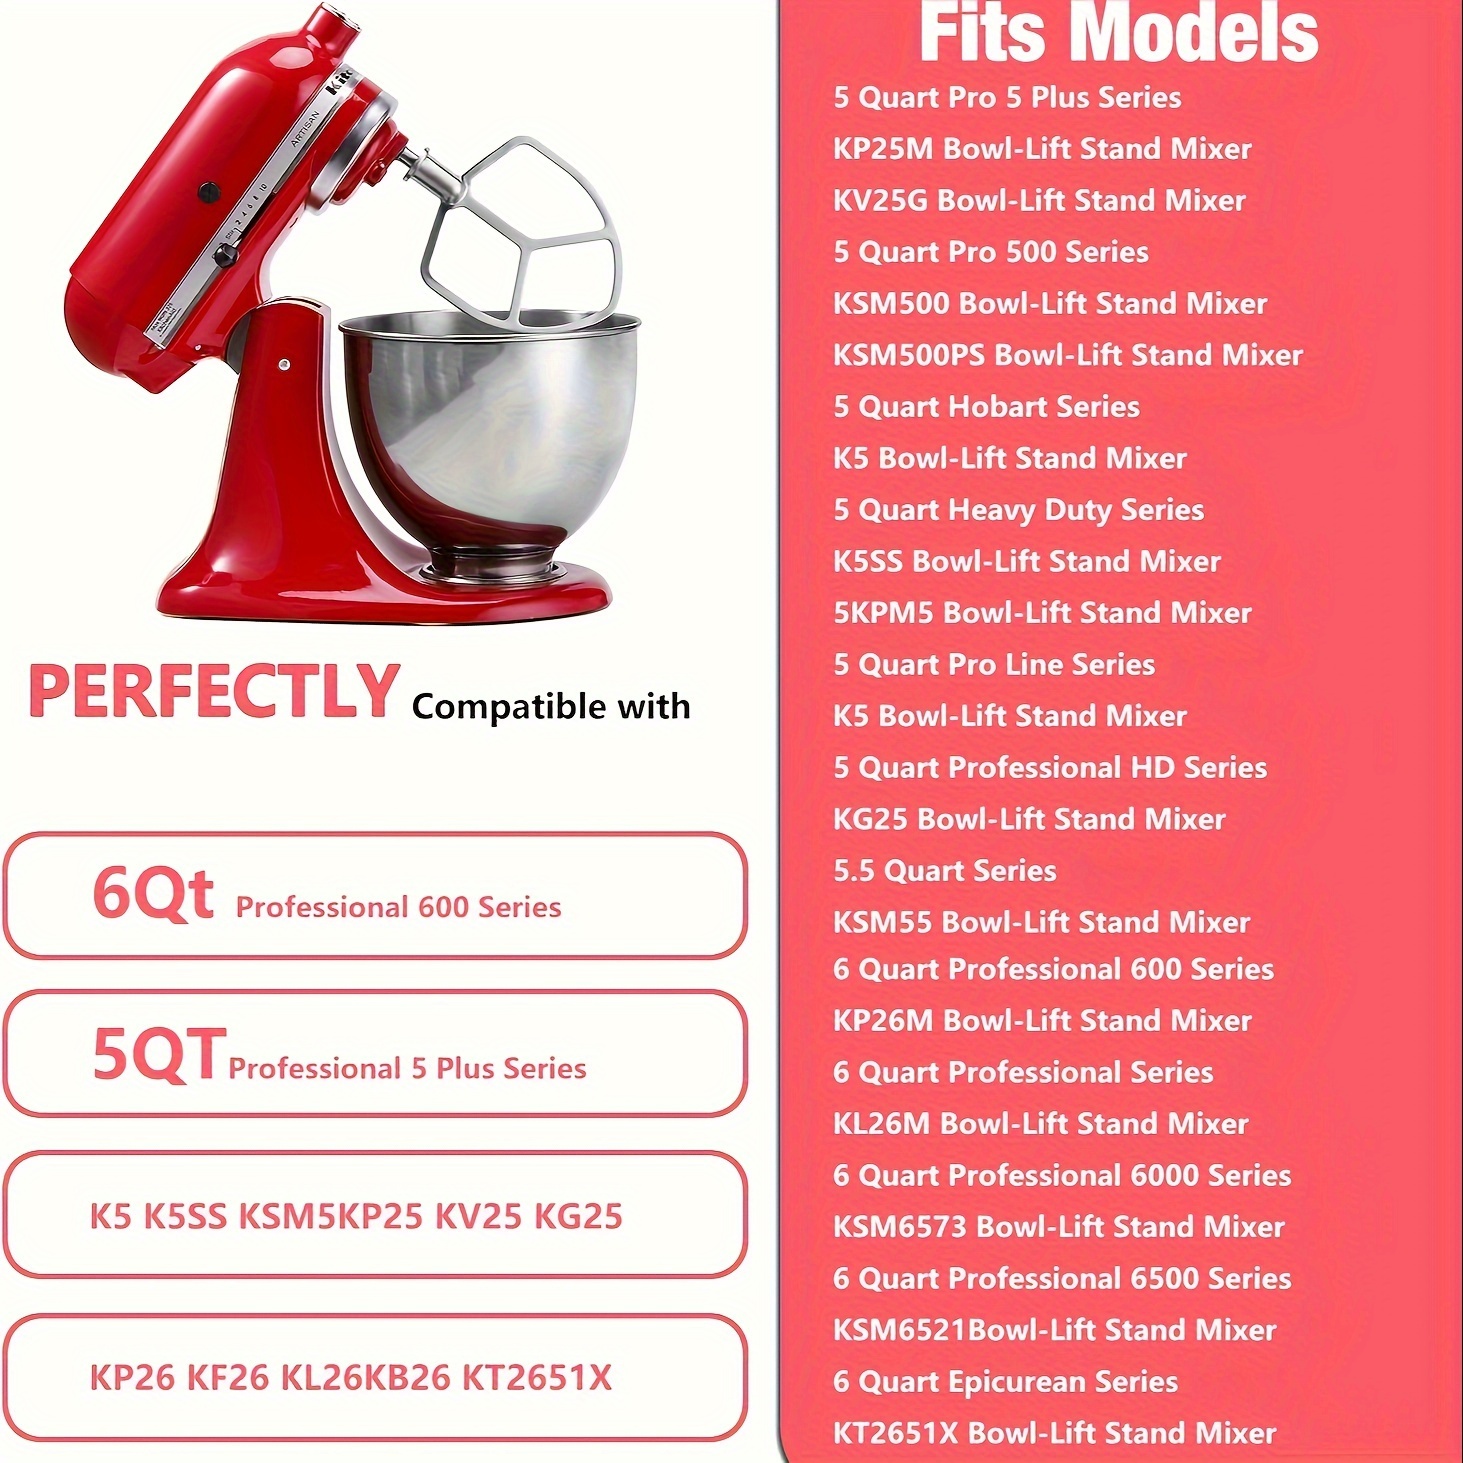 5-6 Quarts ( Approximately 1.8 Liters) Flat Bottom Mixer, Stainless Steel  Paddle Attachment, For KitchenAid Professional 5 Plus And 600 Series Mixers